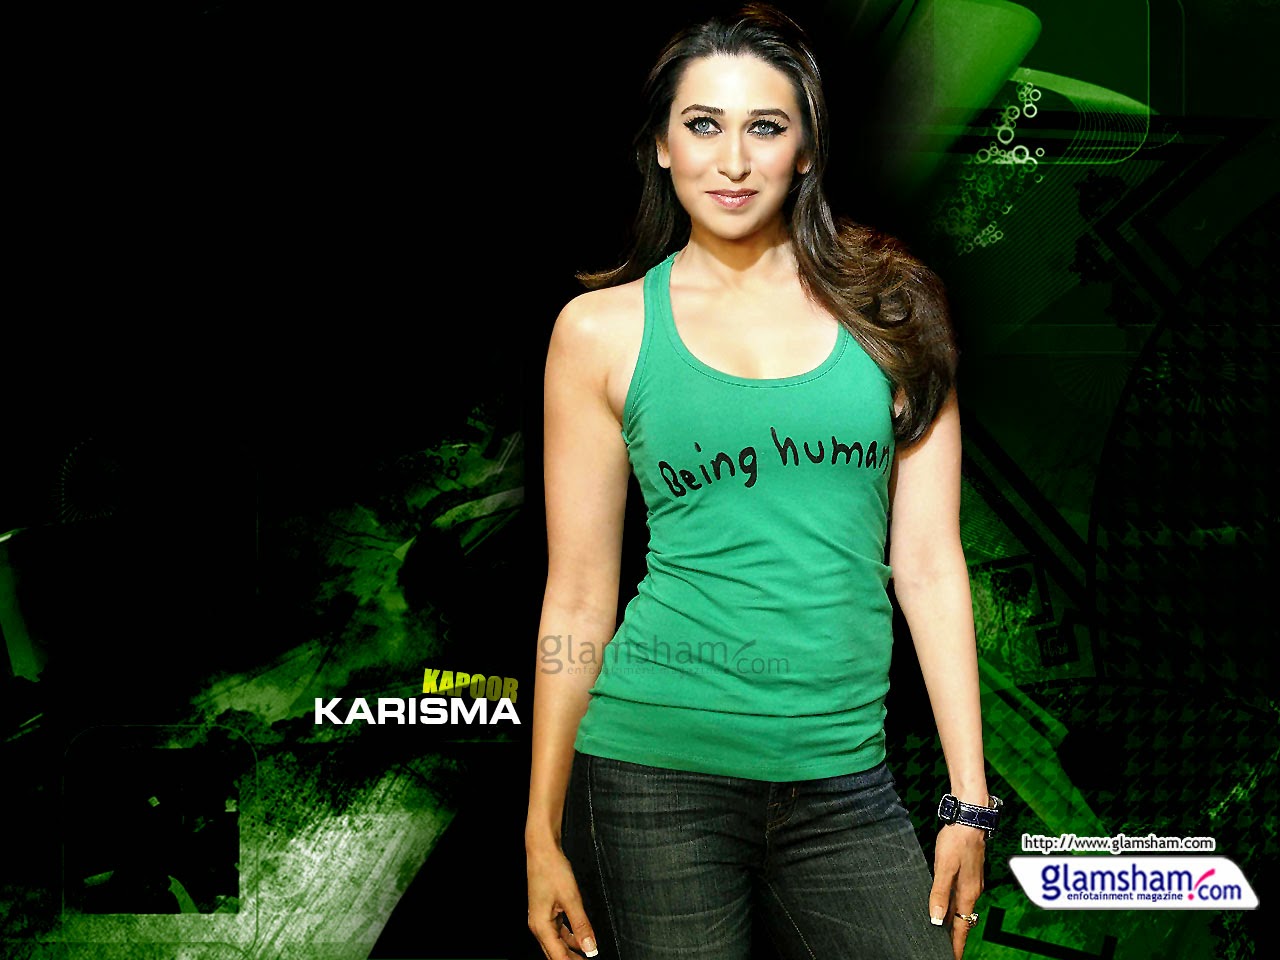 Karishma Kapoor full Hot Hd Wallpapers-Sexy Photos & Pictures  Gallery-Indian hot Actress Karishma Kapoor hot body images,pics - You Are  Here!